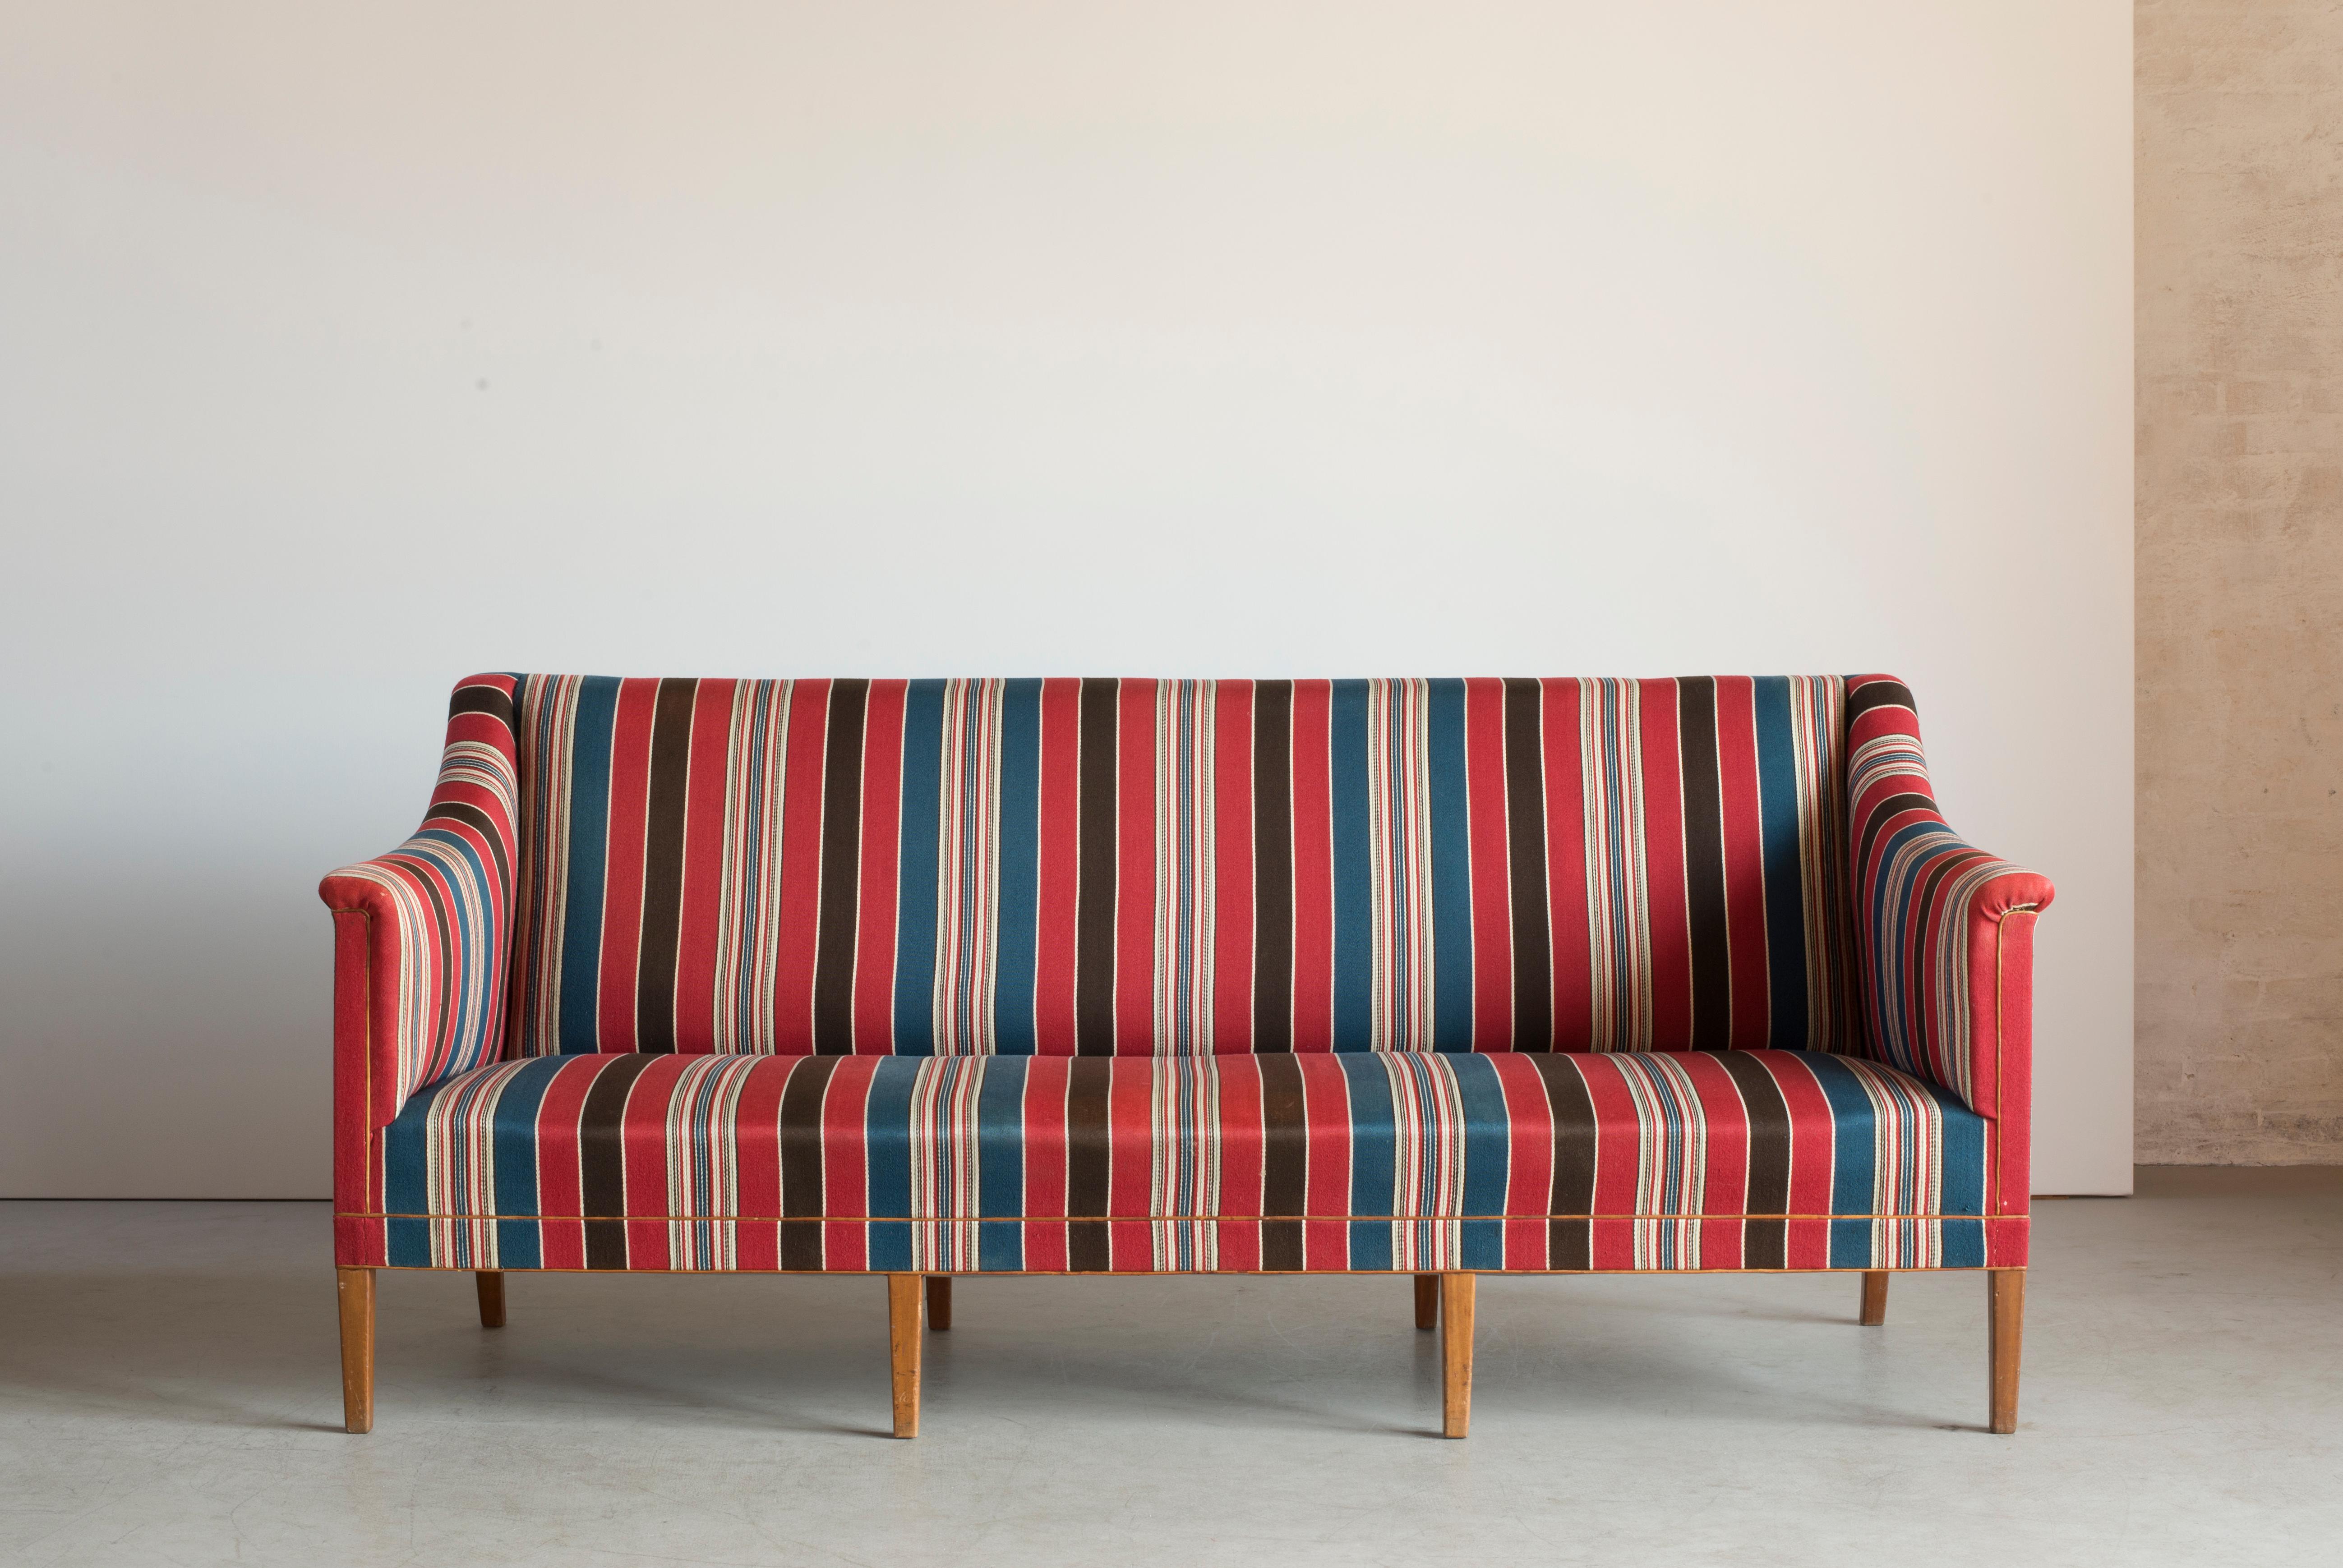 Kaare Klint three seat sofa with eight legs of Mahogany. Seat, sides and back upholstered with blue, red and white striped 